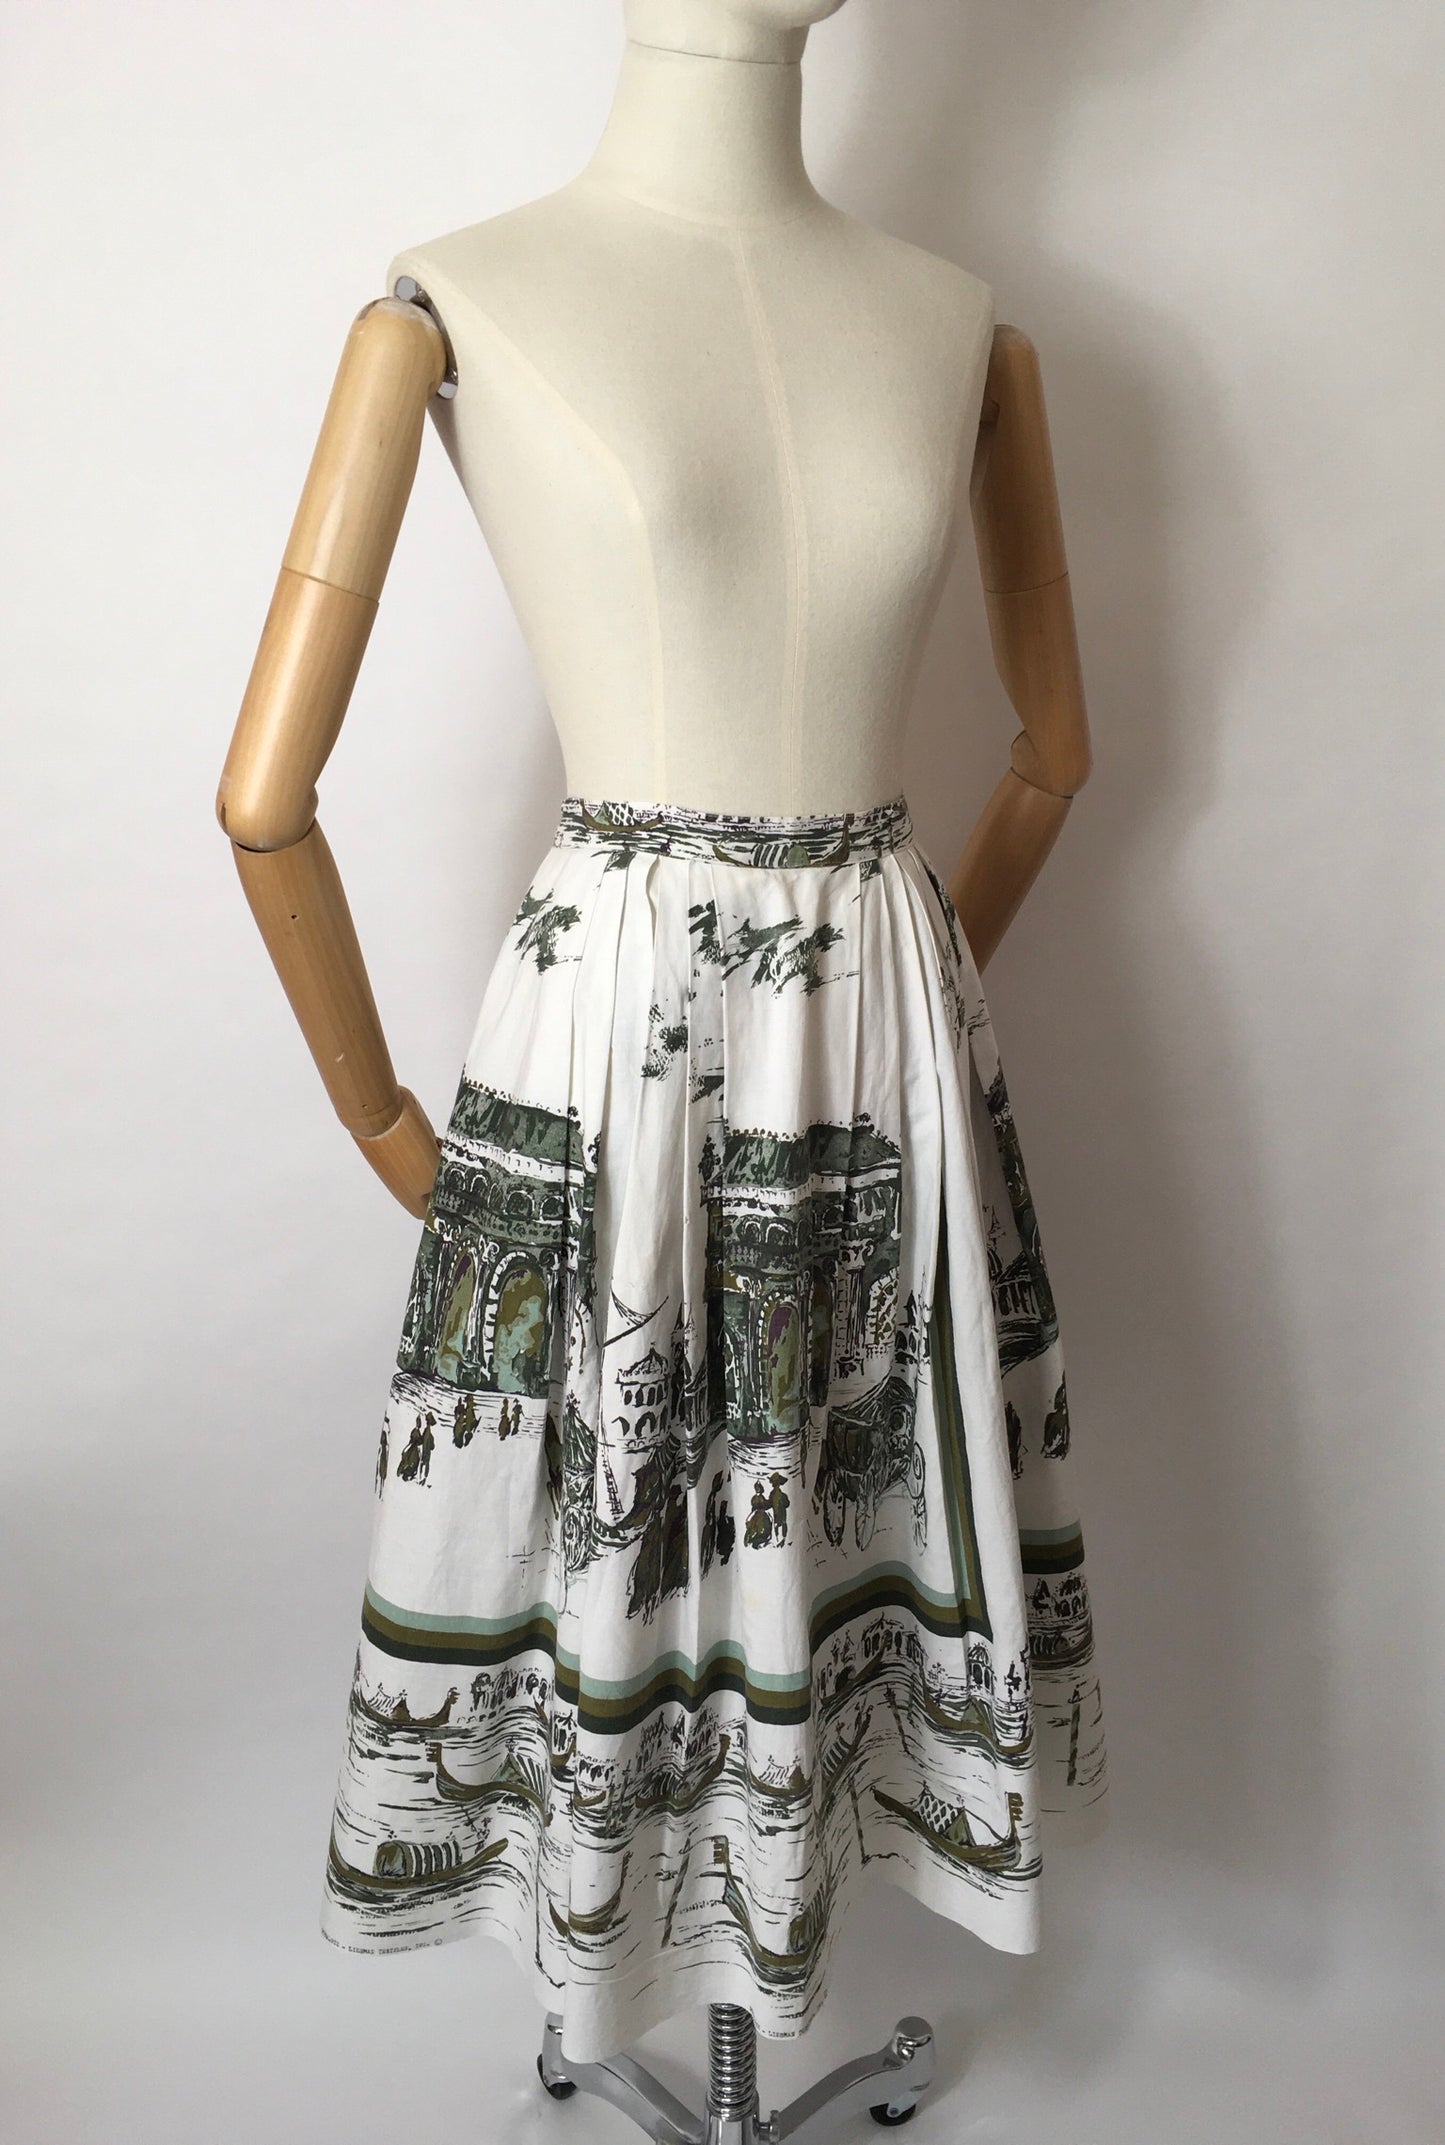 Original 1950’s Novelty Scenic Print Skirt - Featuring Victorian Scenes, Horses & Carriages, Gondolas on the River